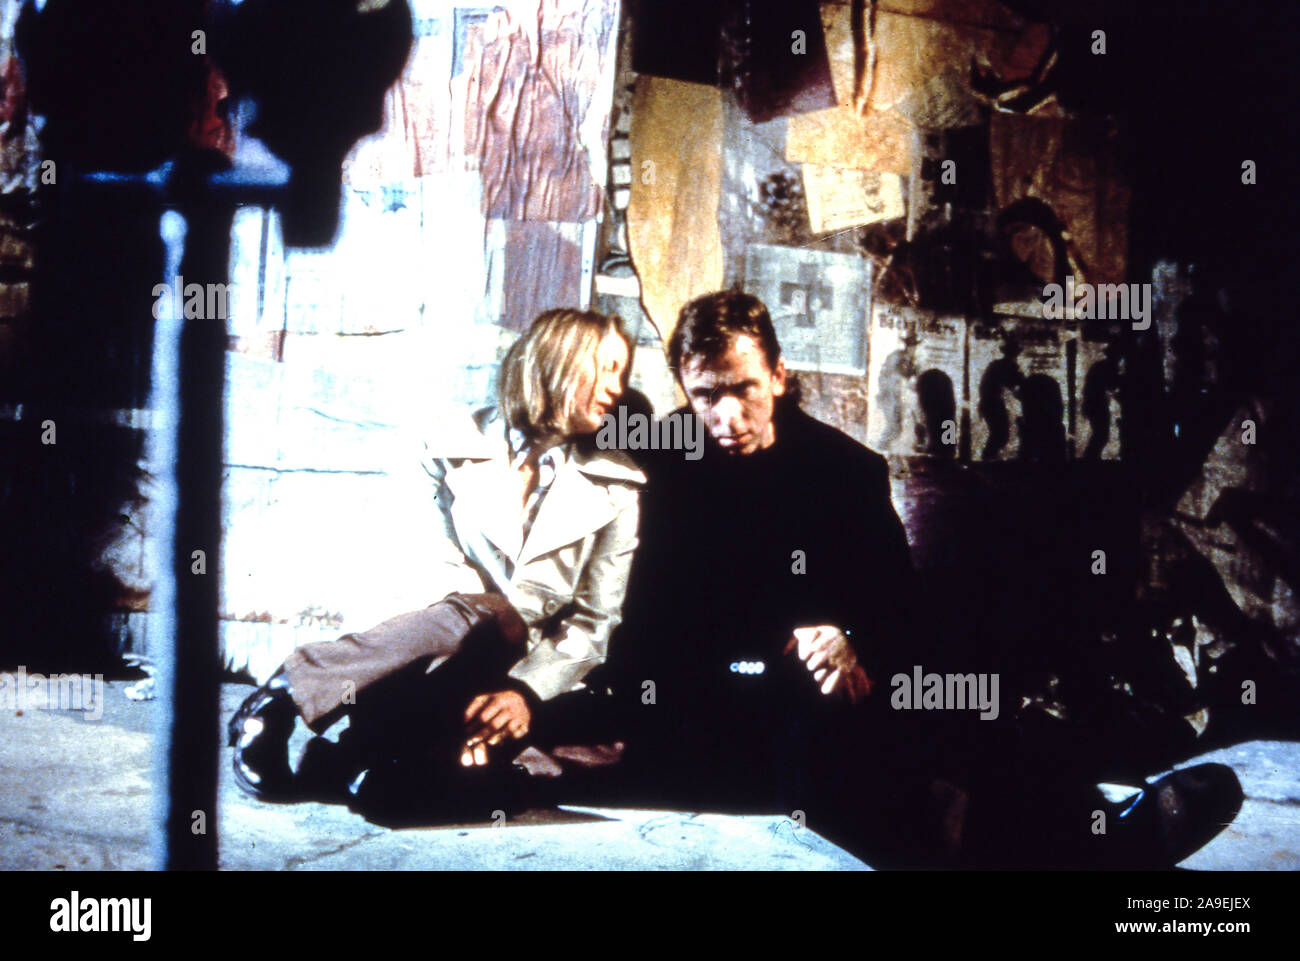 renee zellweger, tim roth, the imposter, 1997 Stock Photo